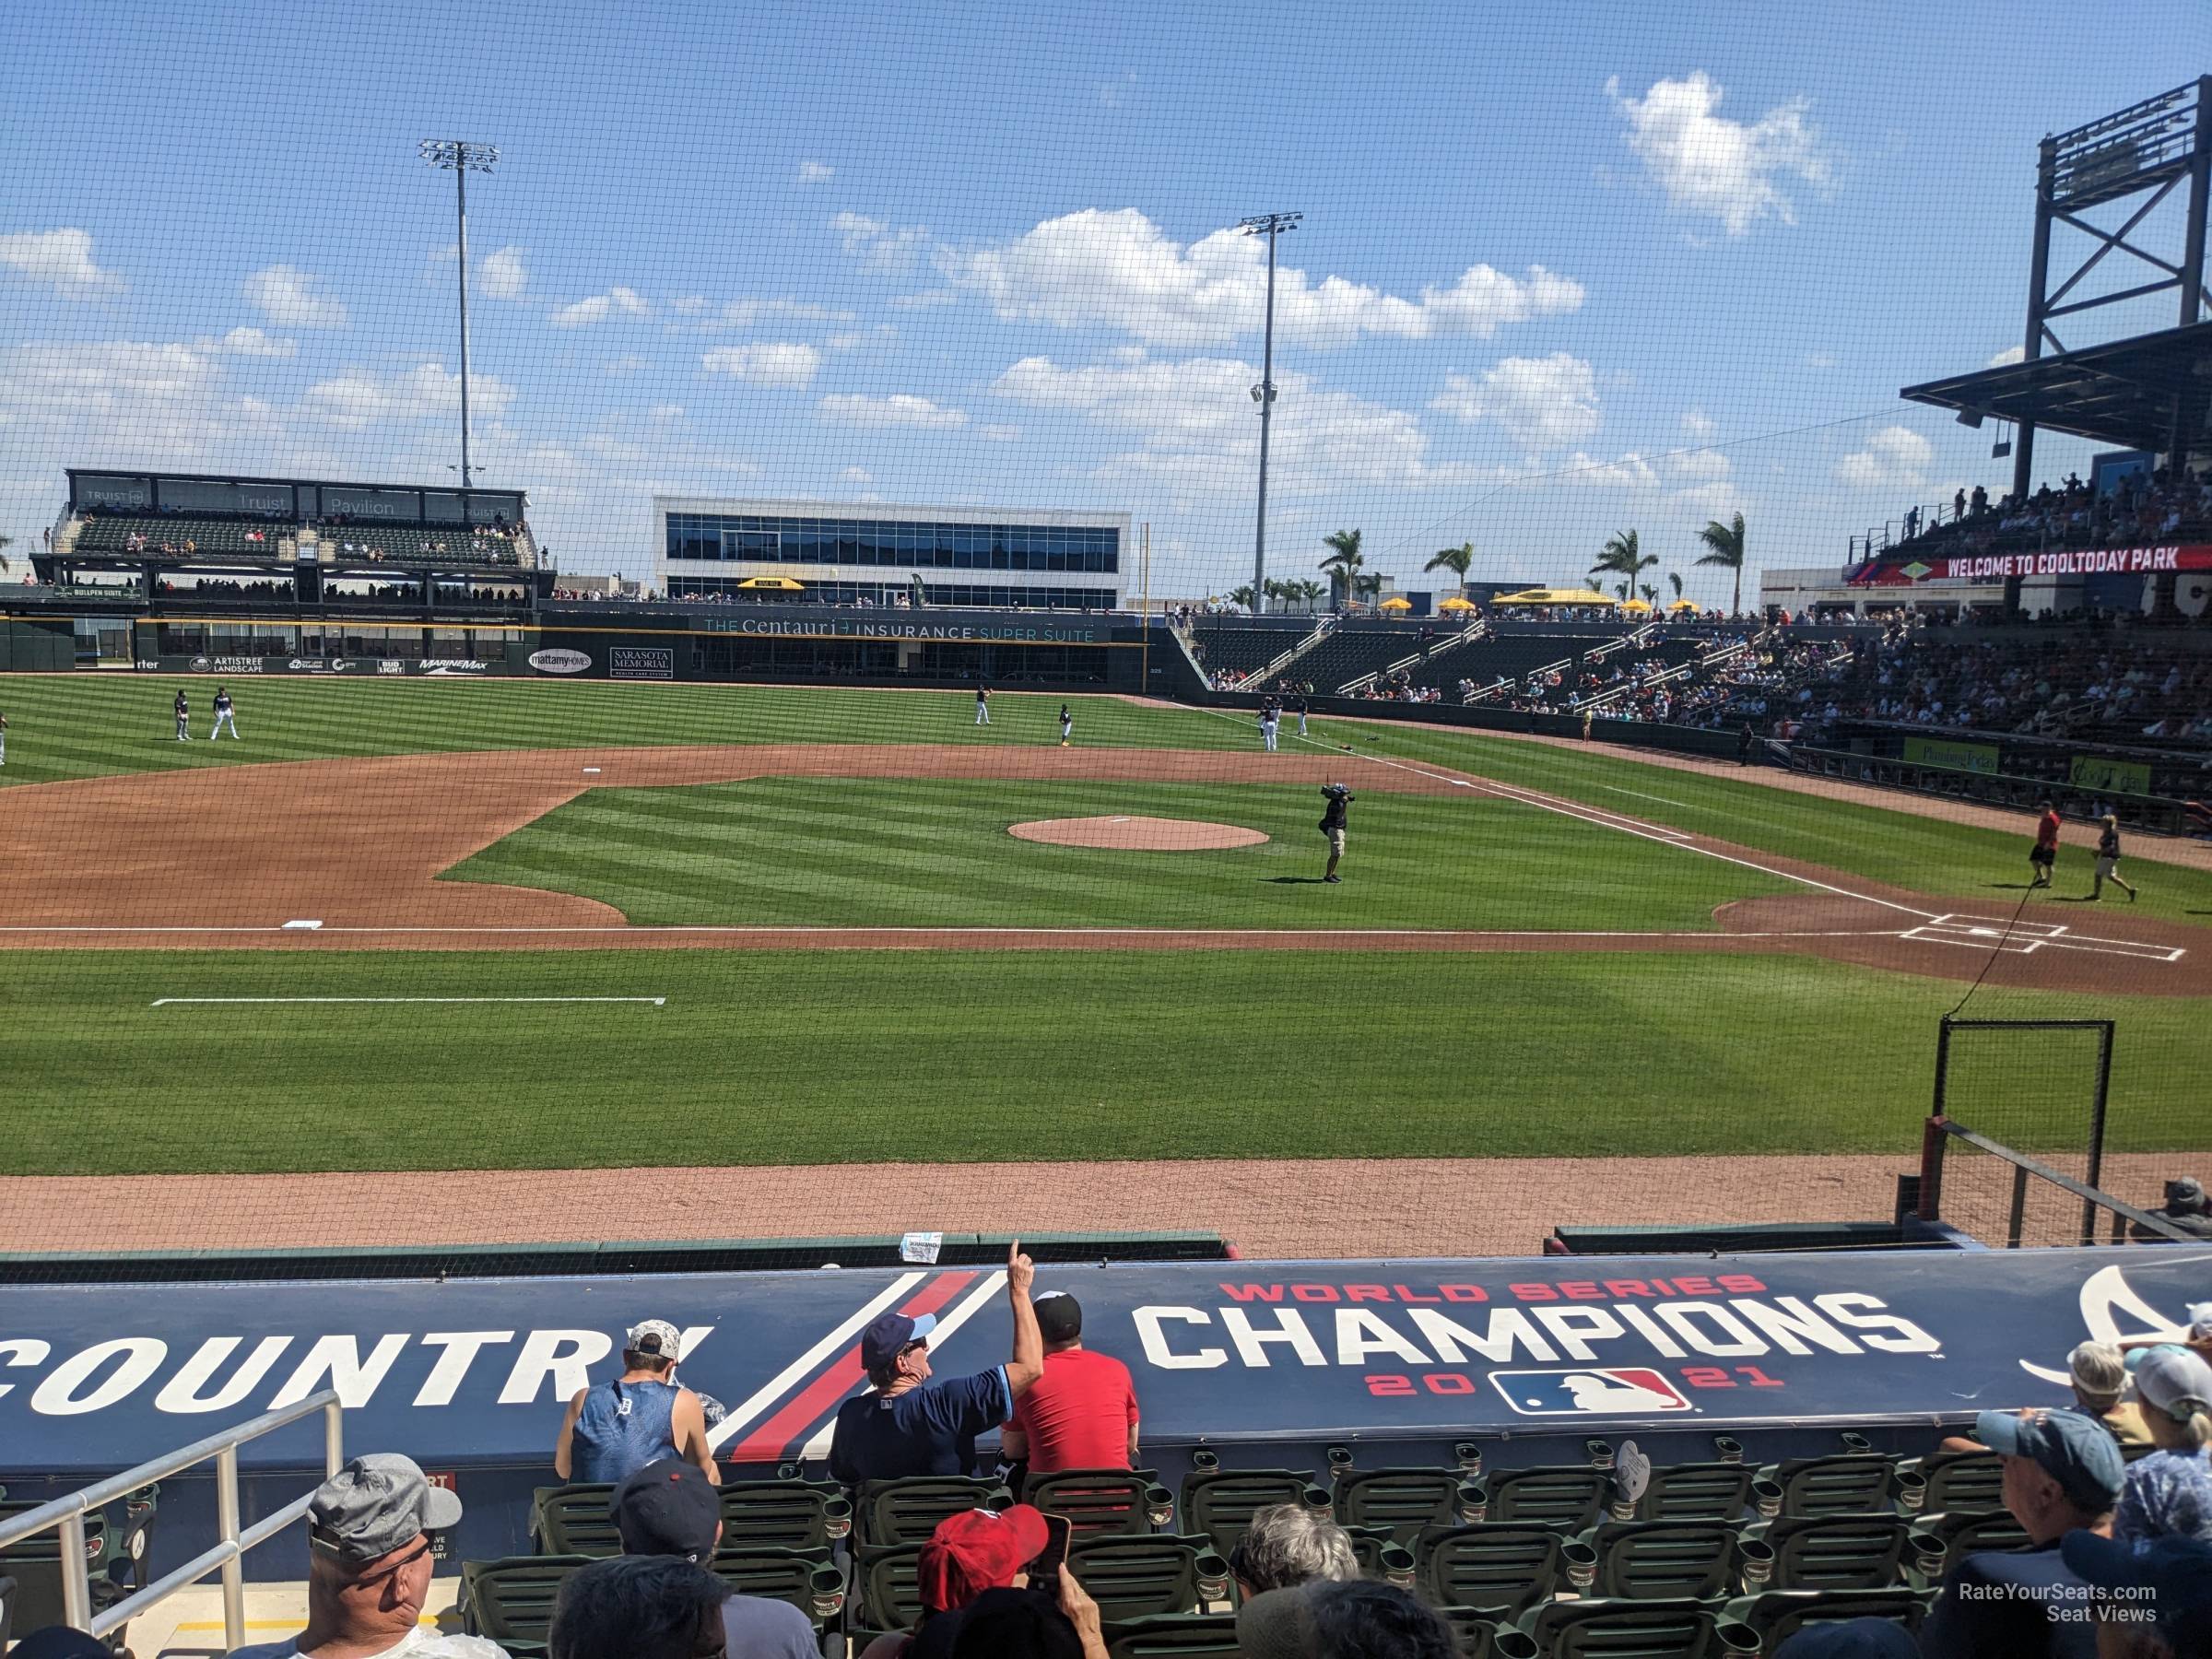 section 115, row 13 seat view  - cooltoday park